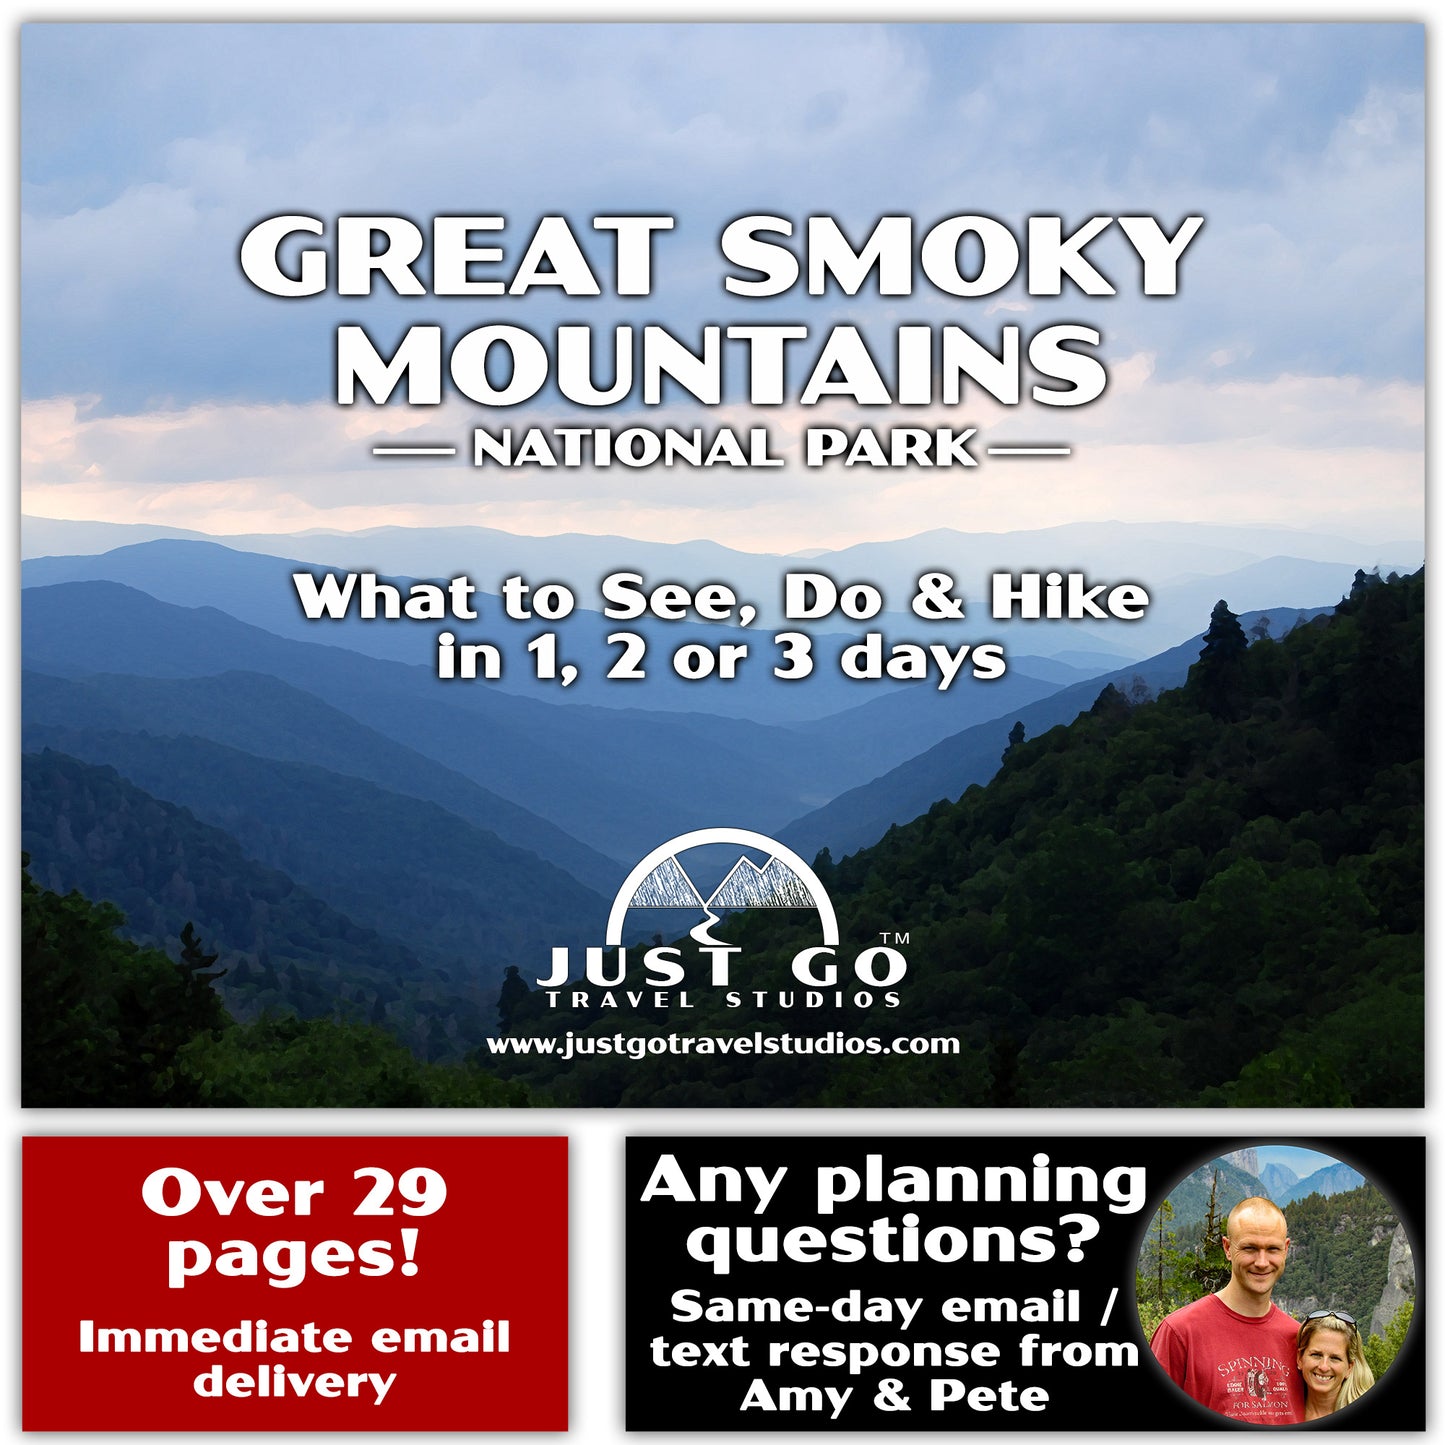 Great Smoky Mountains National Park Itinerary (Digital Download)